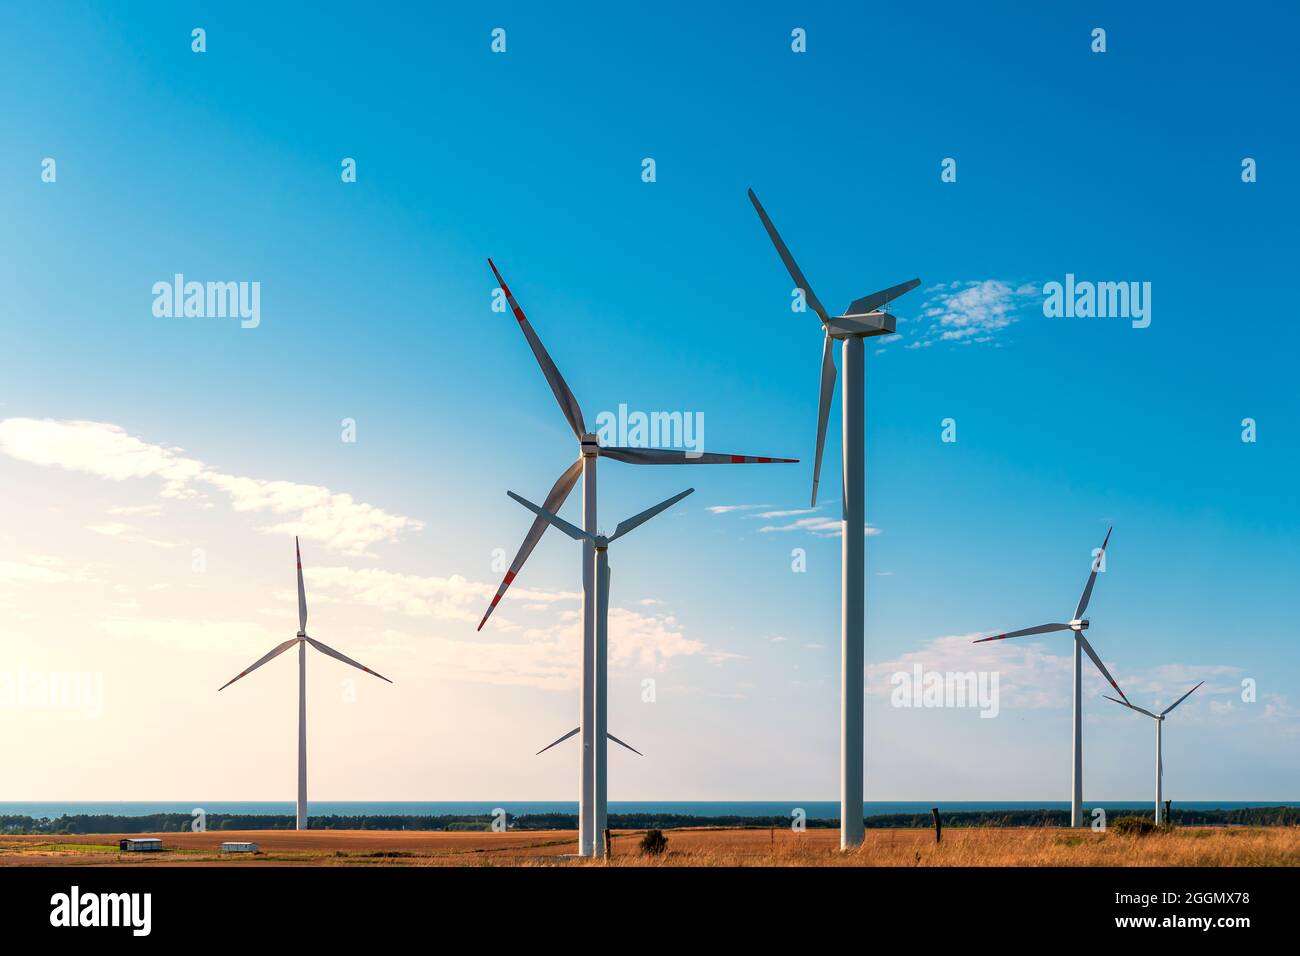 Windmills generating electricity located on a hill in the coastal area, the Baltic Sea in the background, wind farm against the blue sky, Poland Europ Stock Photo